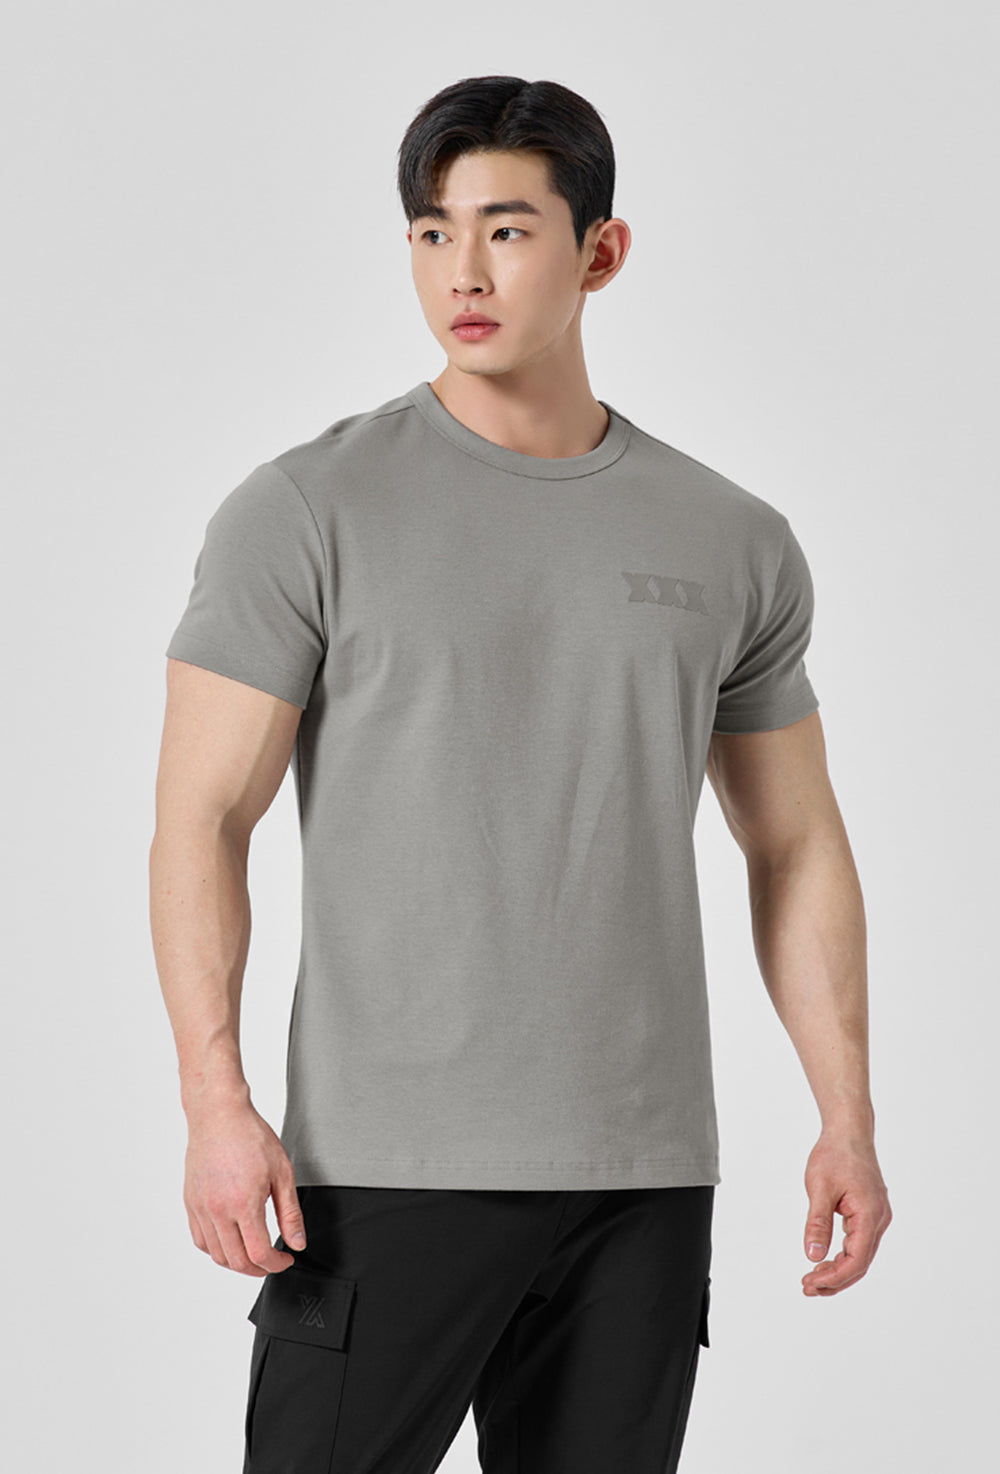 Muscle Fit Dual Short Sleeve - City Gray